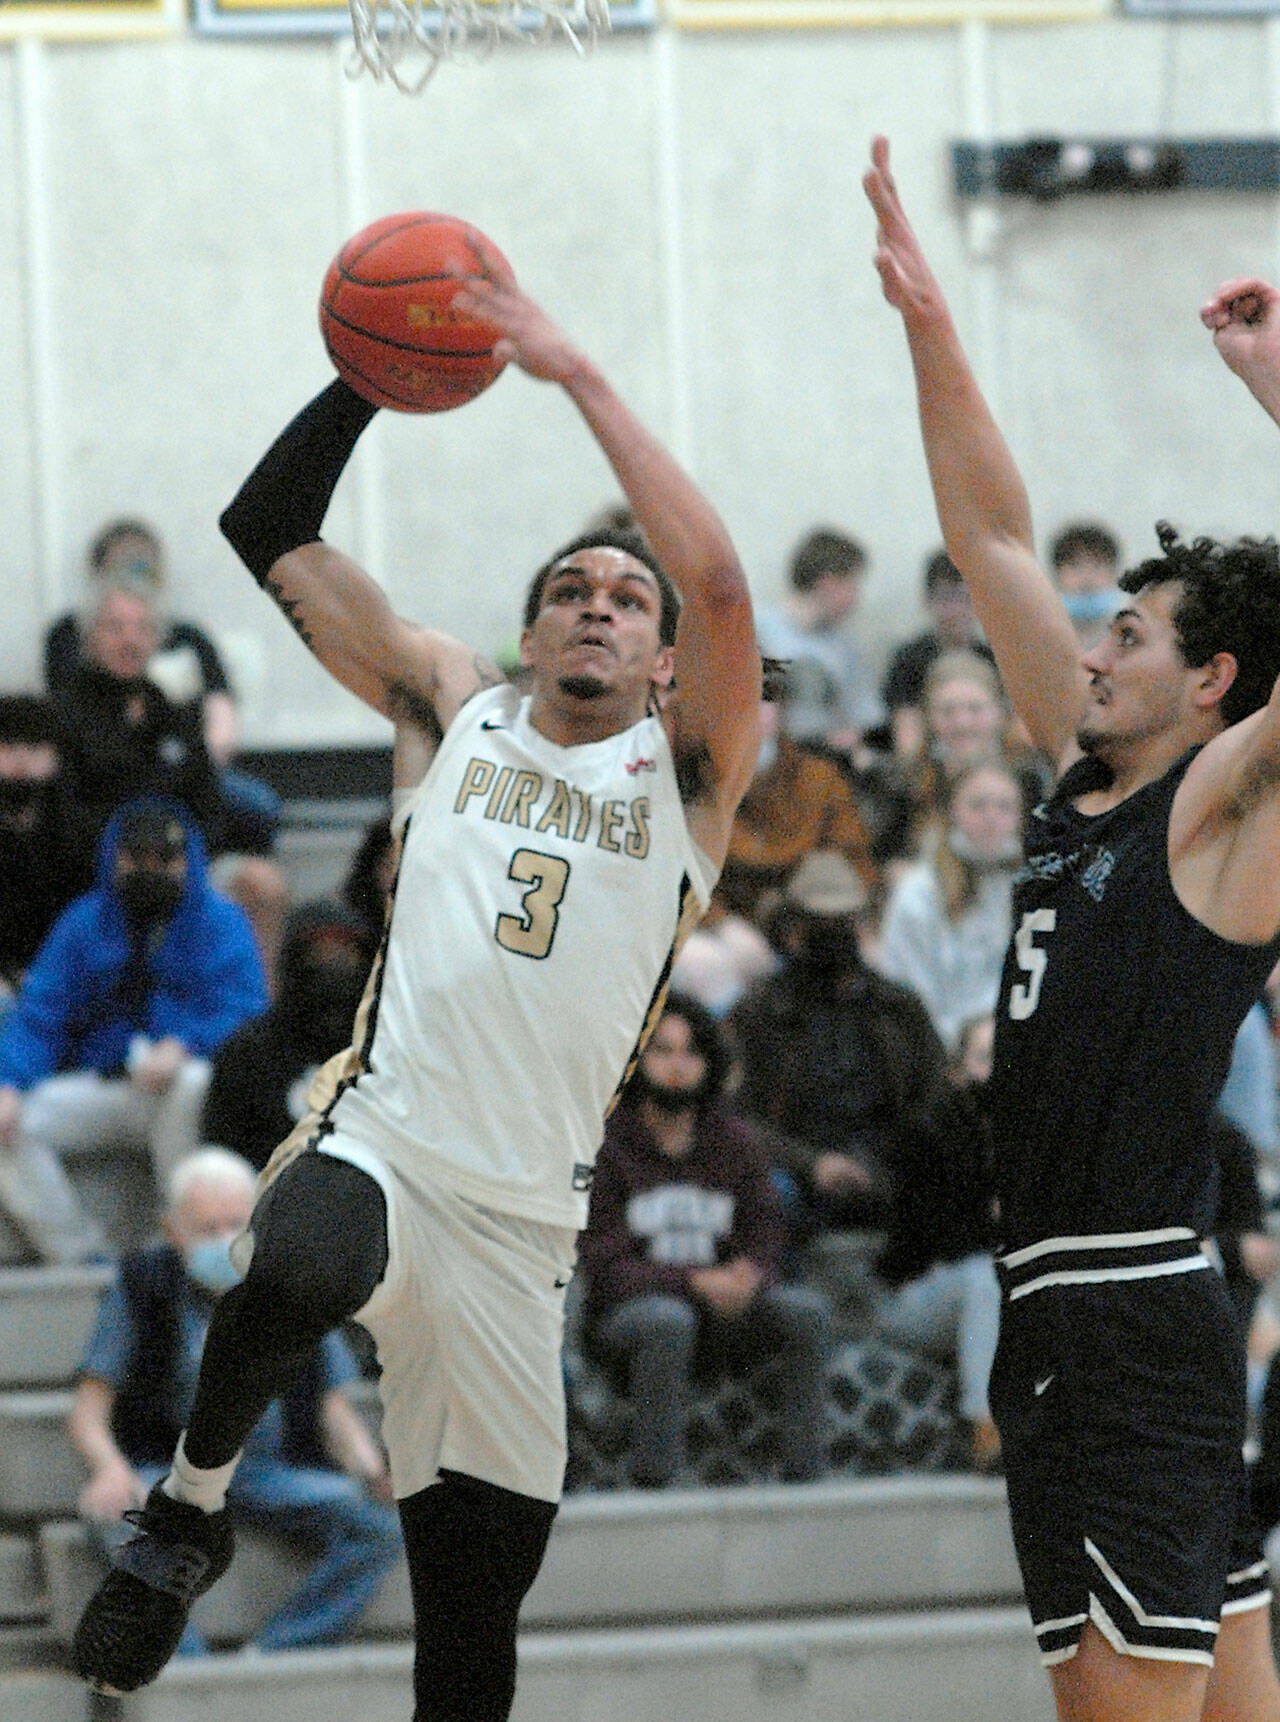 Peninsula’s Jaylin Reed, left, aims for the rim as Bellevue’s Bishop Tosi defends the lane on Saturday at Peninsula College. (Keith Thorpe/Peninsula Daily News)